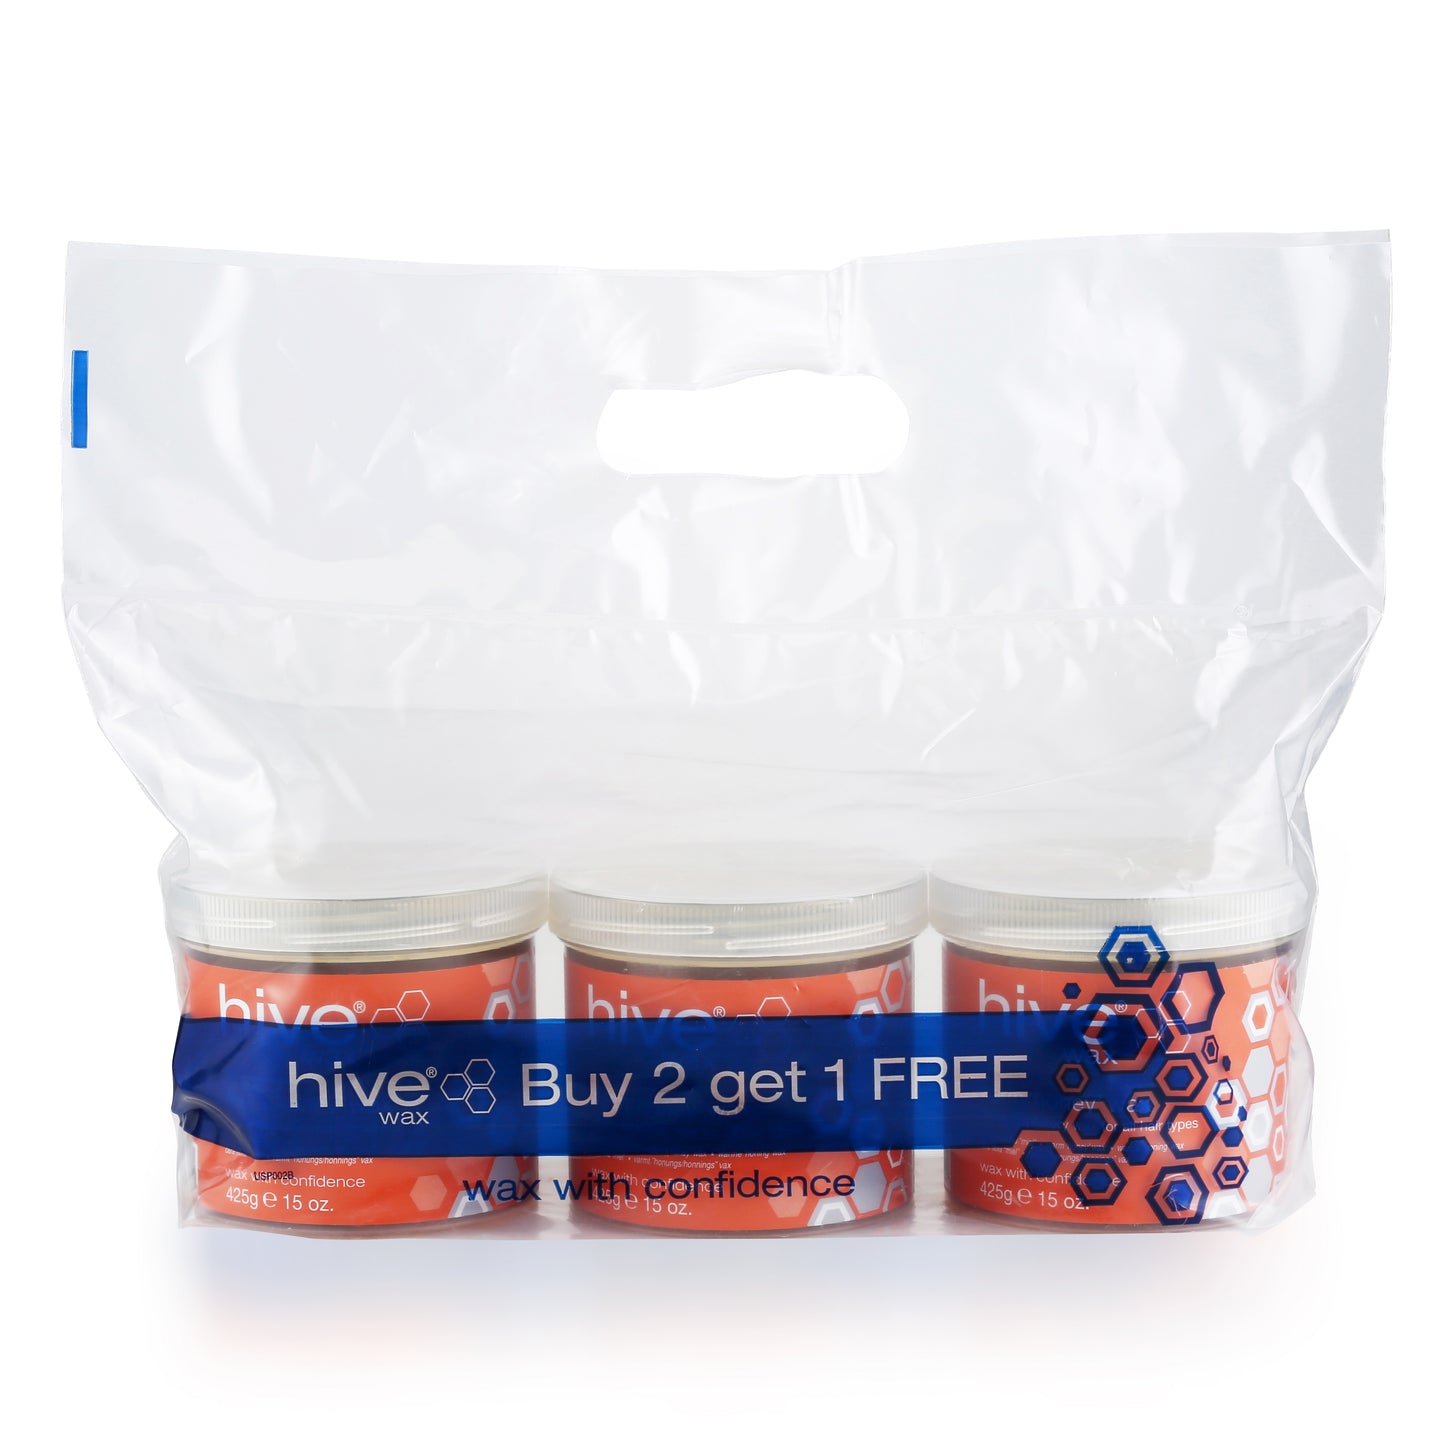 WARM 'HONEY' WAX - 3 FOR 2 PACK